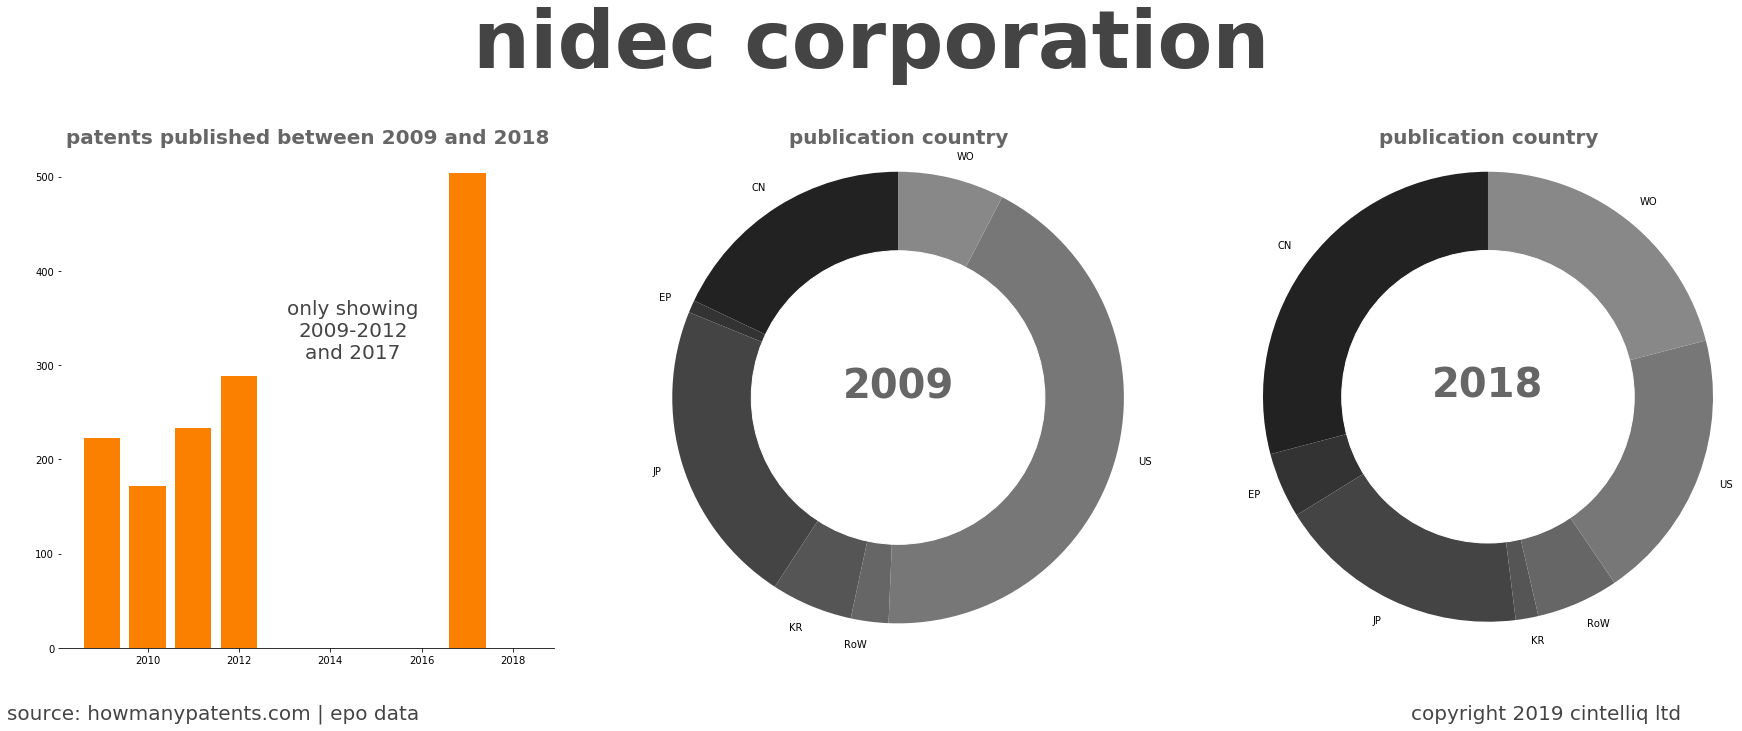 summary of patents for Nidec Corporation